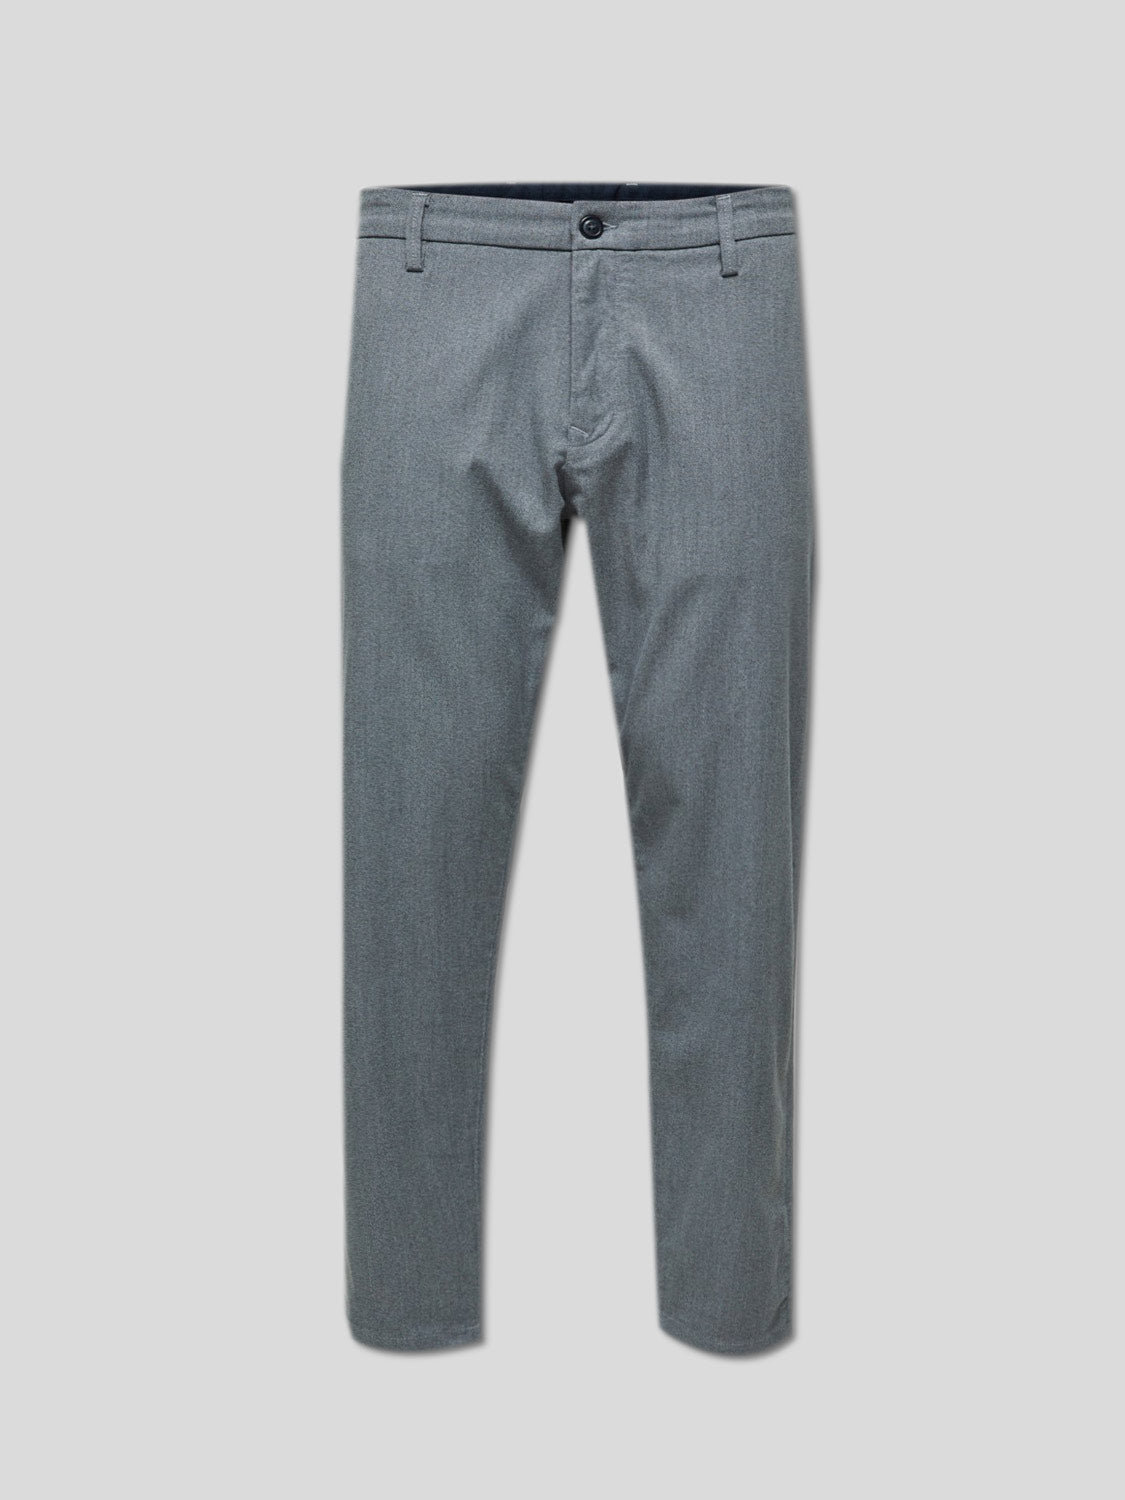 BEATLE GRAY TROUSERS